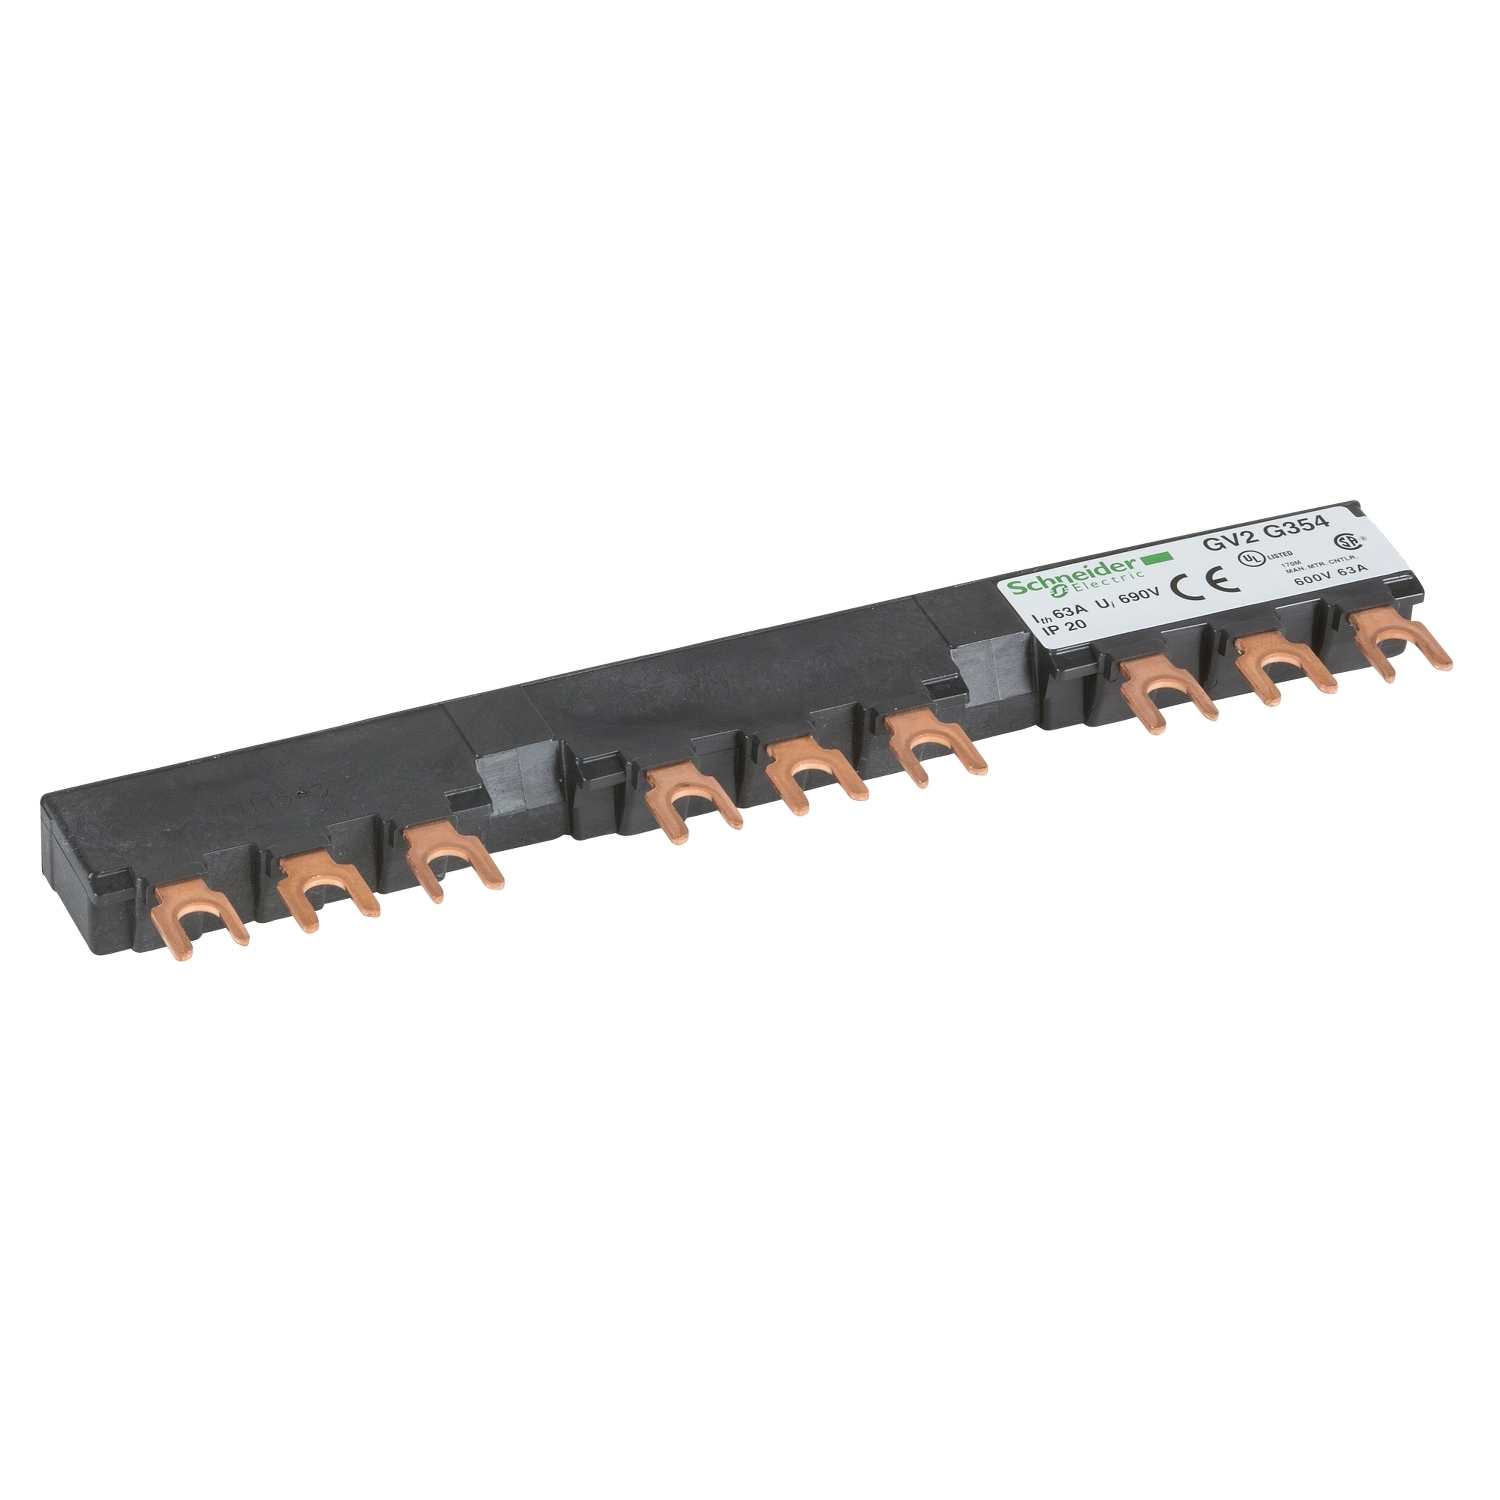 Linergy FT, Comb busbar, 63 A, 3 tap-offs, 54 mm pitch